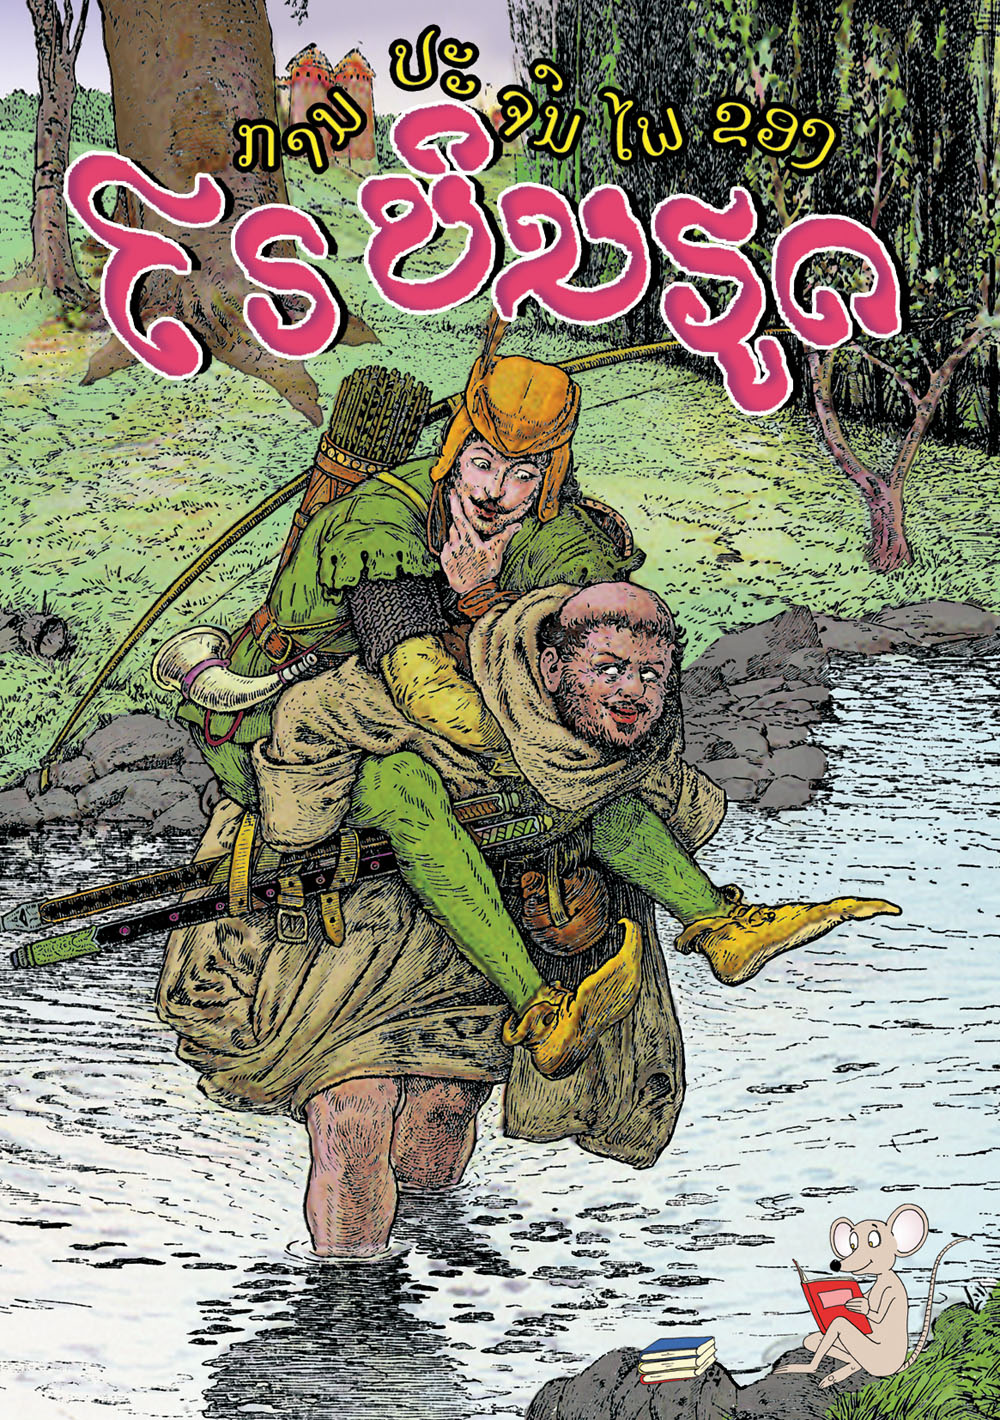 The Adventures of Robin Hood large book cover, published in Lao language